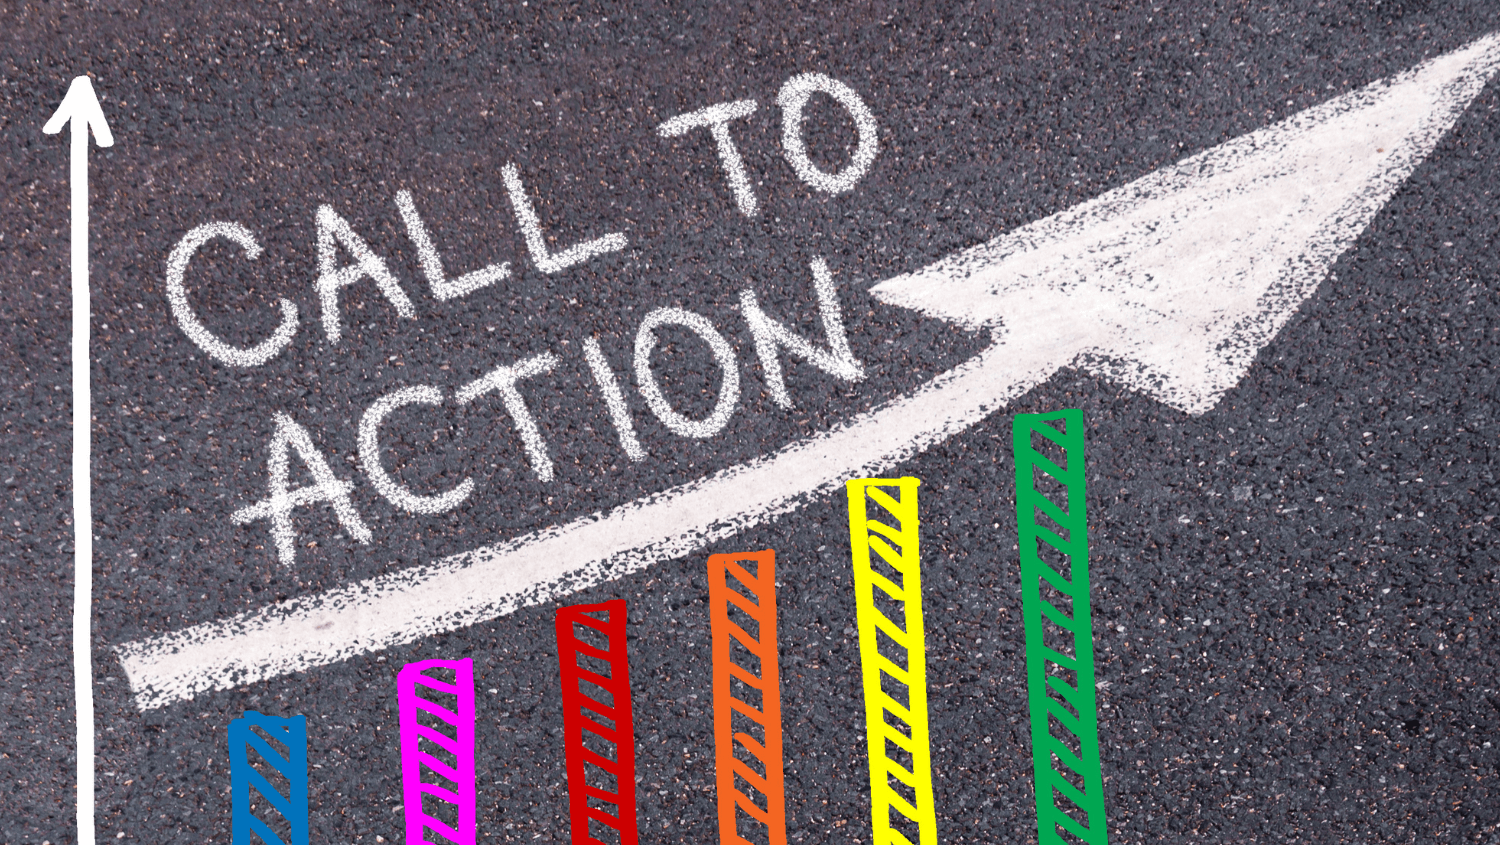 The call-to-action - a secret marketing tool